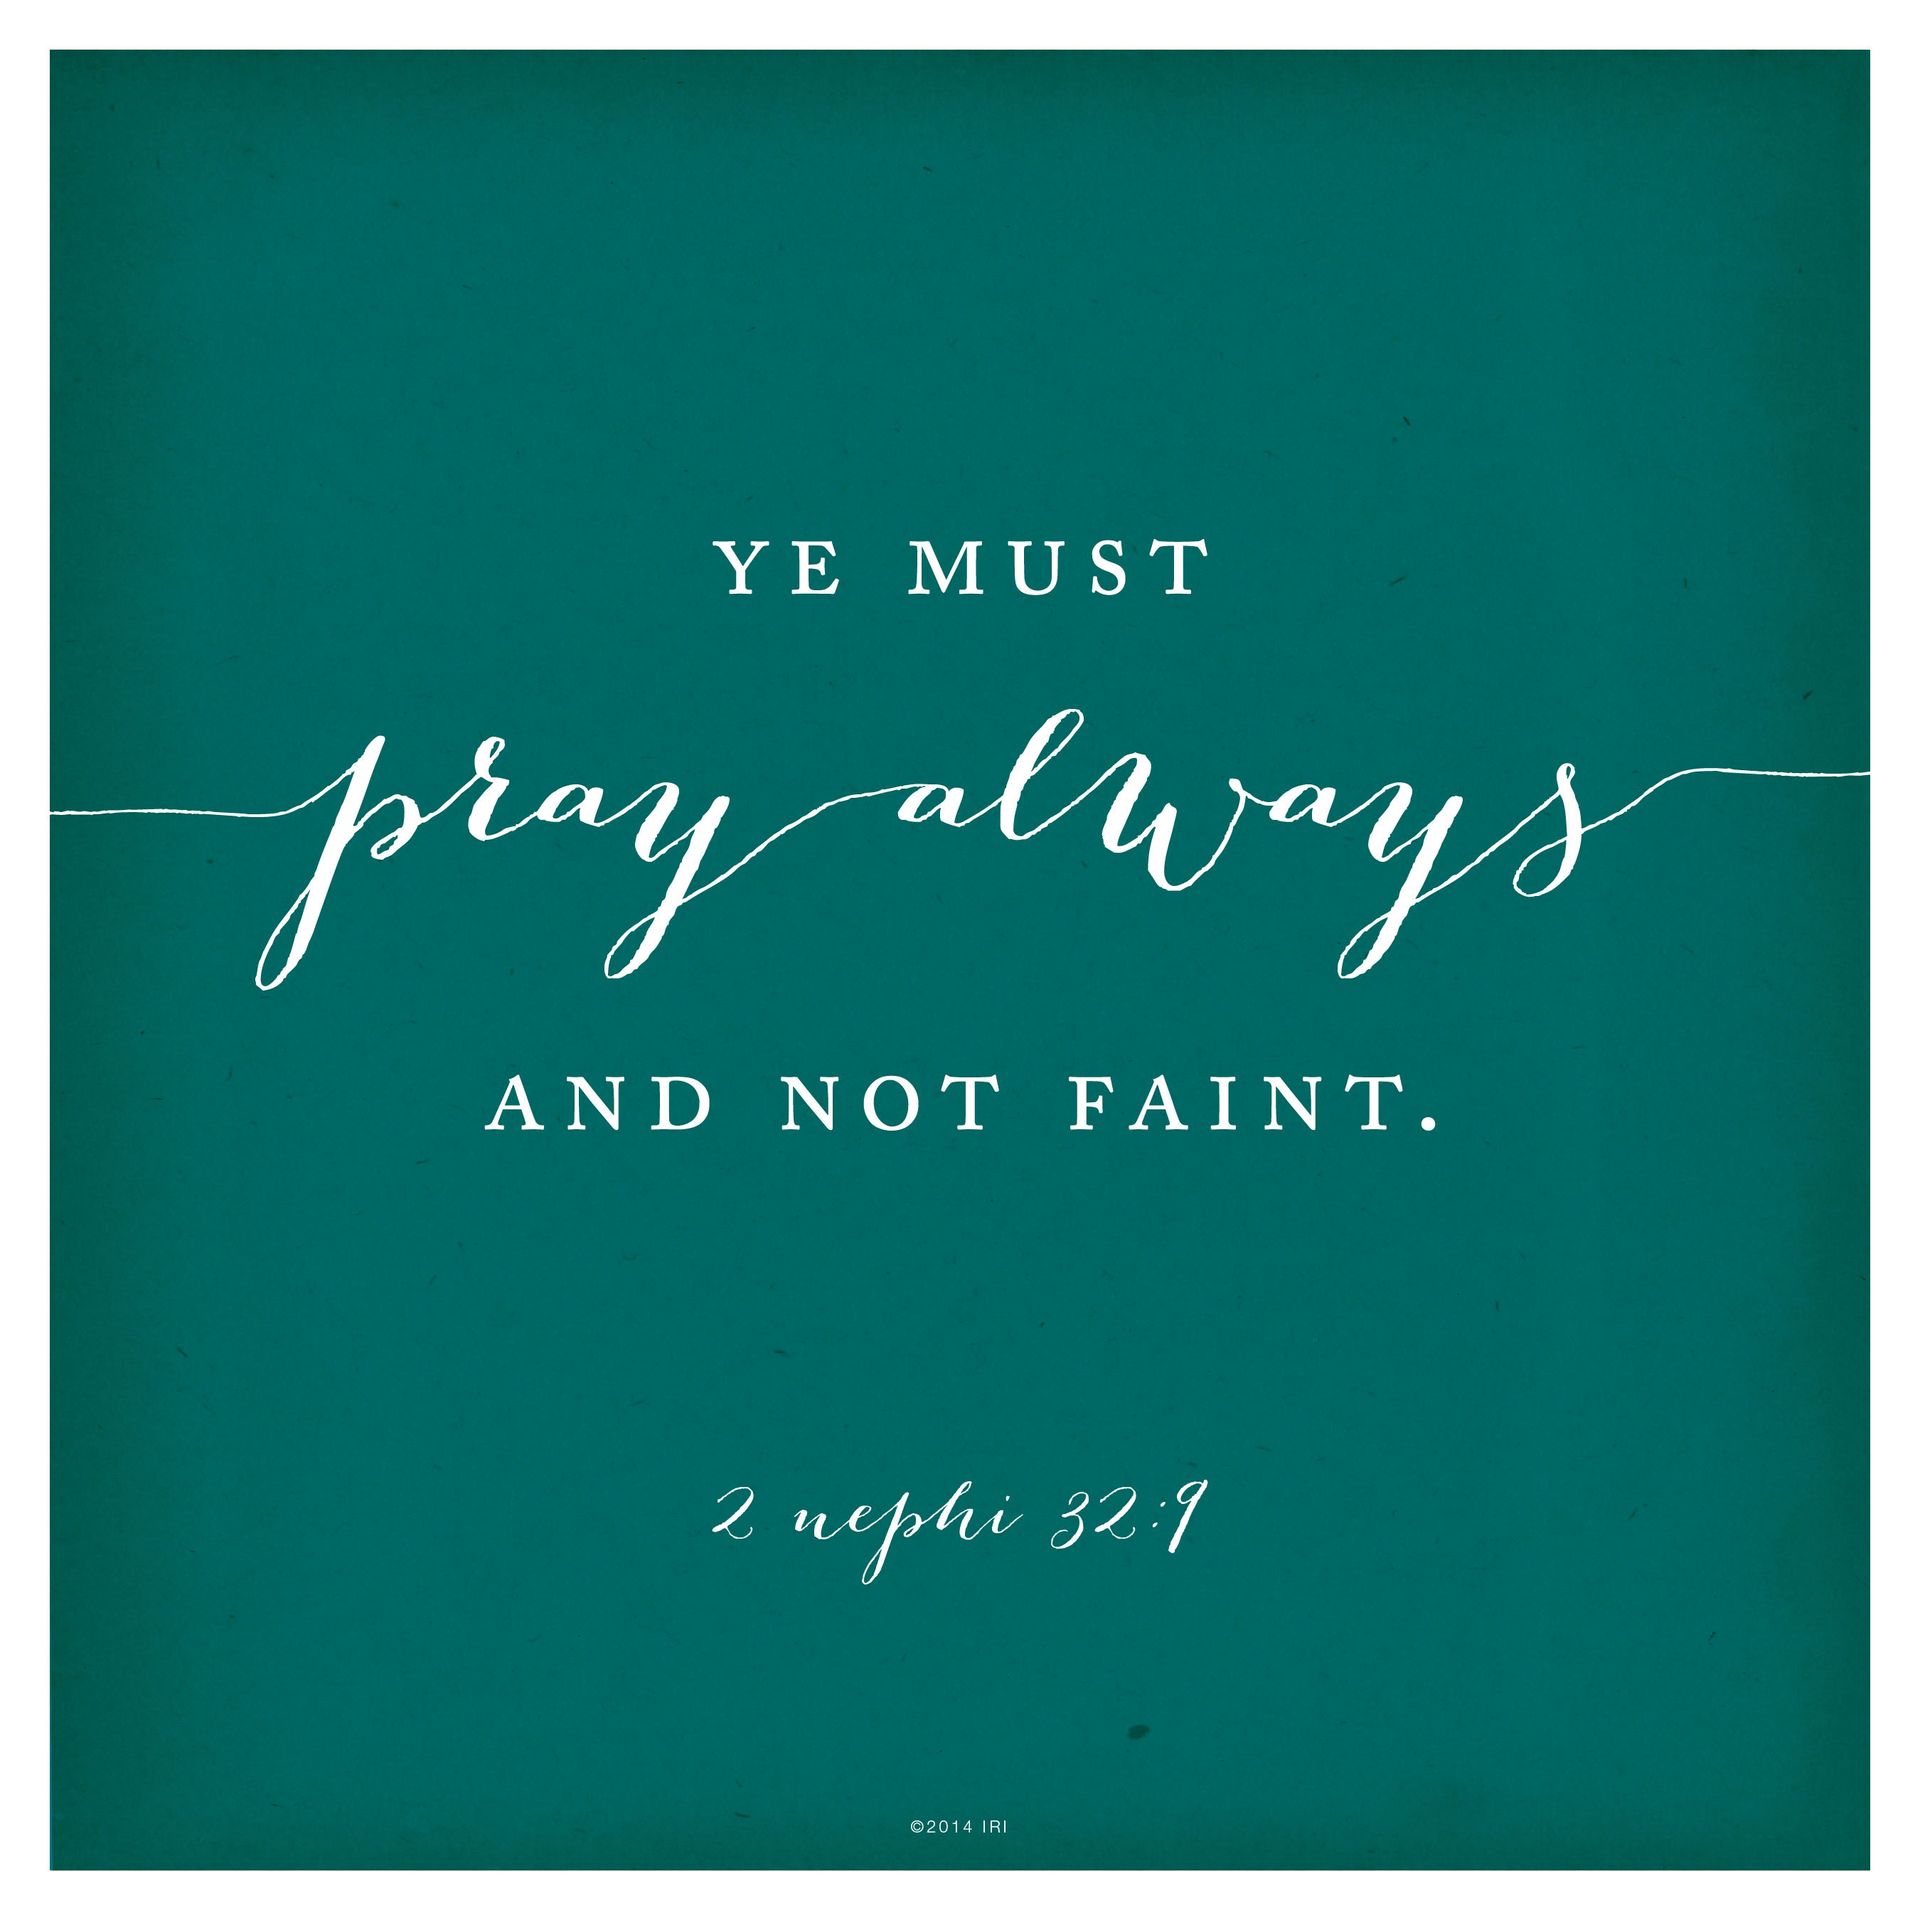 “Ye must pray always, and not faint.”—2 Nephi 32:9